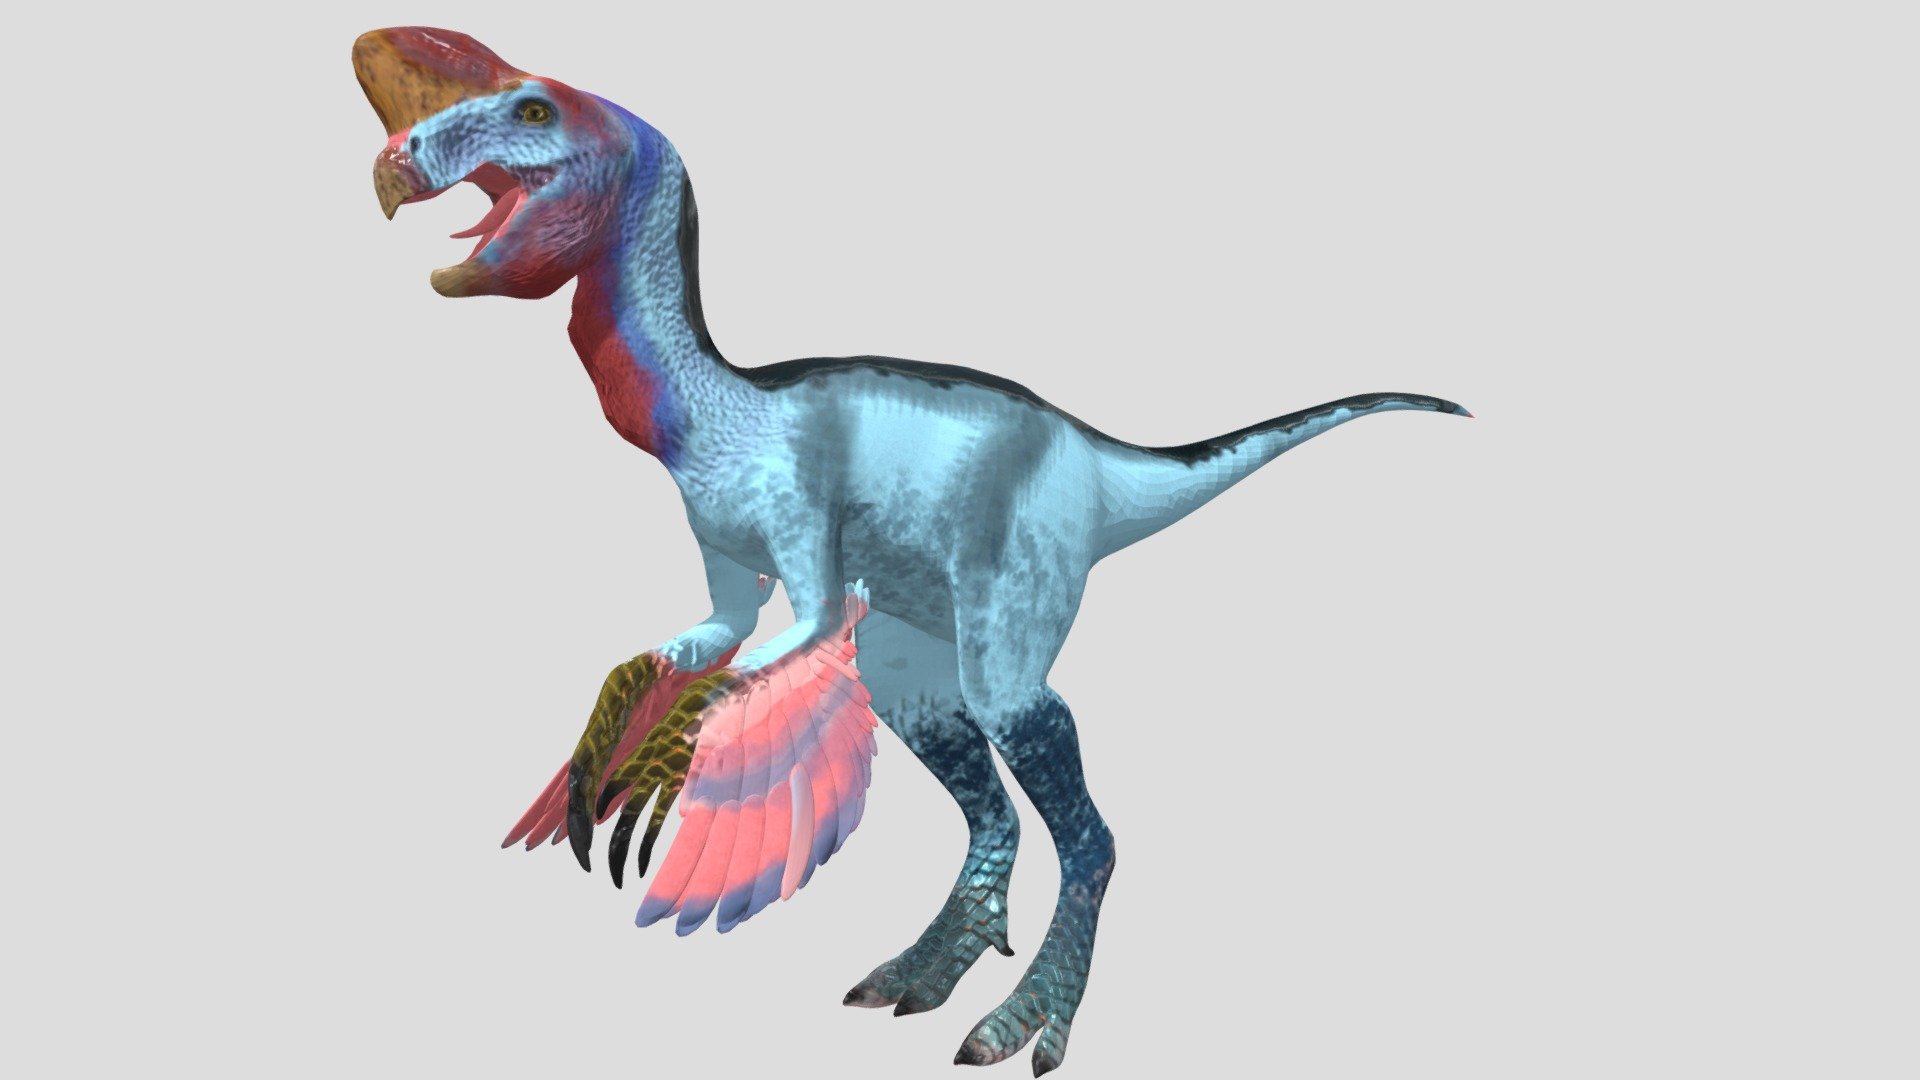 3d model of a Oviraptor. Perfect for games, scenes or renders.

Model is correctly divided into main parts. All main parts are presented as separate parts therefore materials of objects are easy to be modified or removed and standard parts are easy to be replaced.

TEXTURES: Models includes high textures with maps: Base Color (.png) Height (.png) Metallic (.png) Normal (.png) Roughness (.png)

FORMATS: .obj .dae .stl .blend .fbx .3ds

GENERAL: Easy editable. Model is fully textured.

Vertices: 41.4 k Polygons: 41.1k

All formats have been tested and work correctly.

Some files may need textures or materials adjusted or added depending on the program they are imported into 3d model